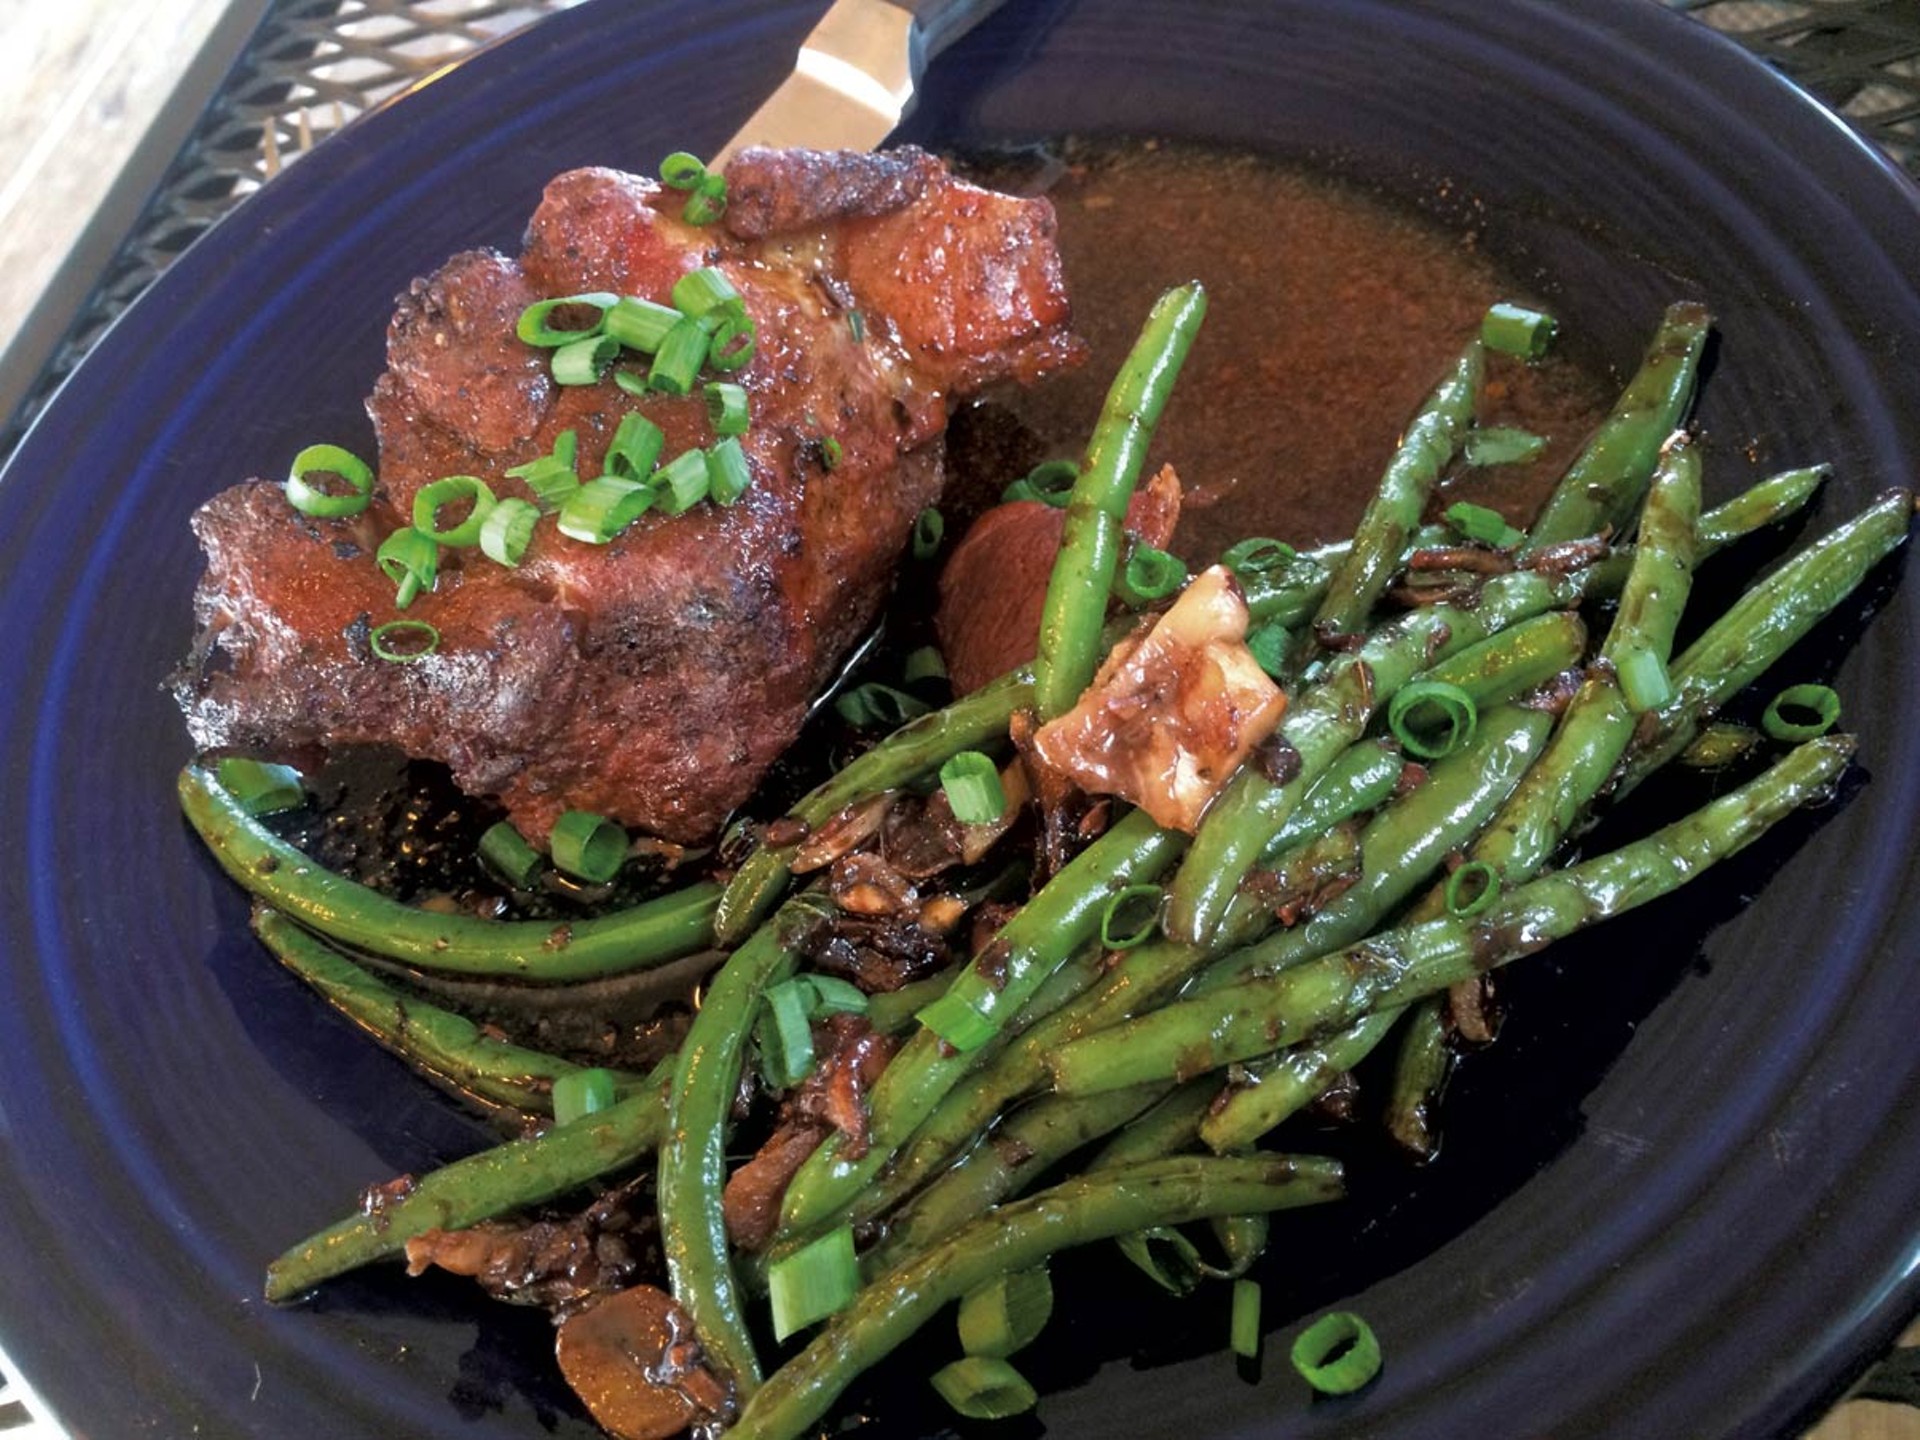 Braised pork with green beans at Zach's Caf&eacute;